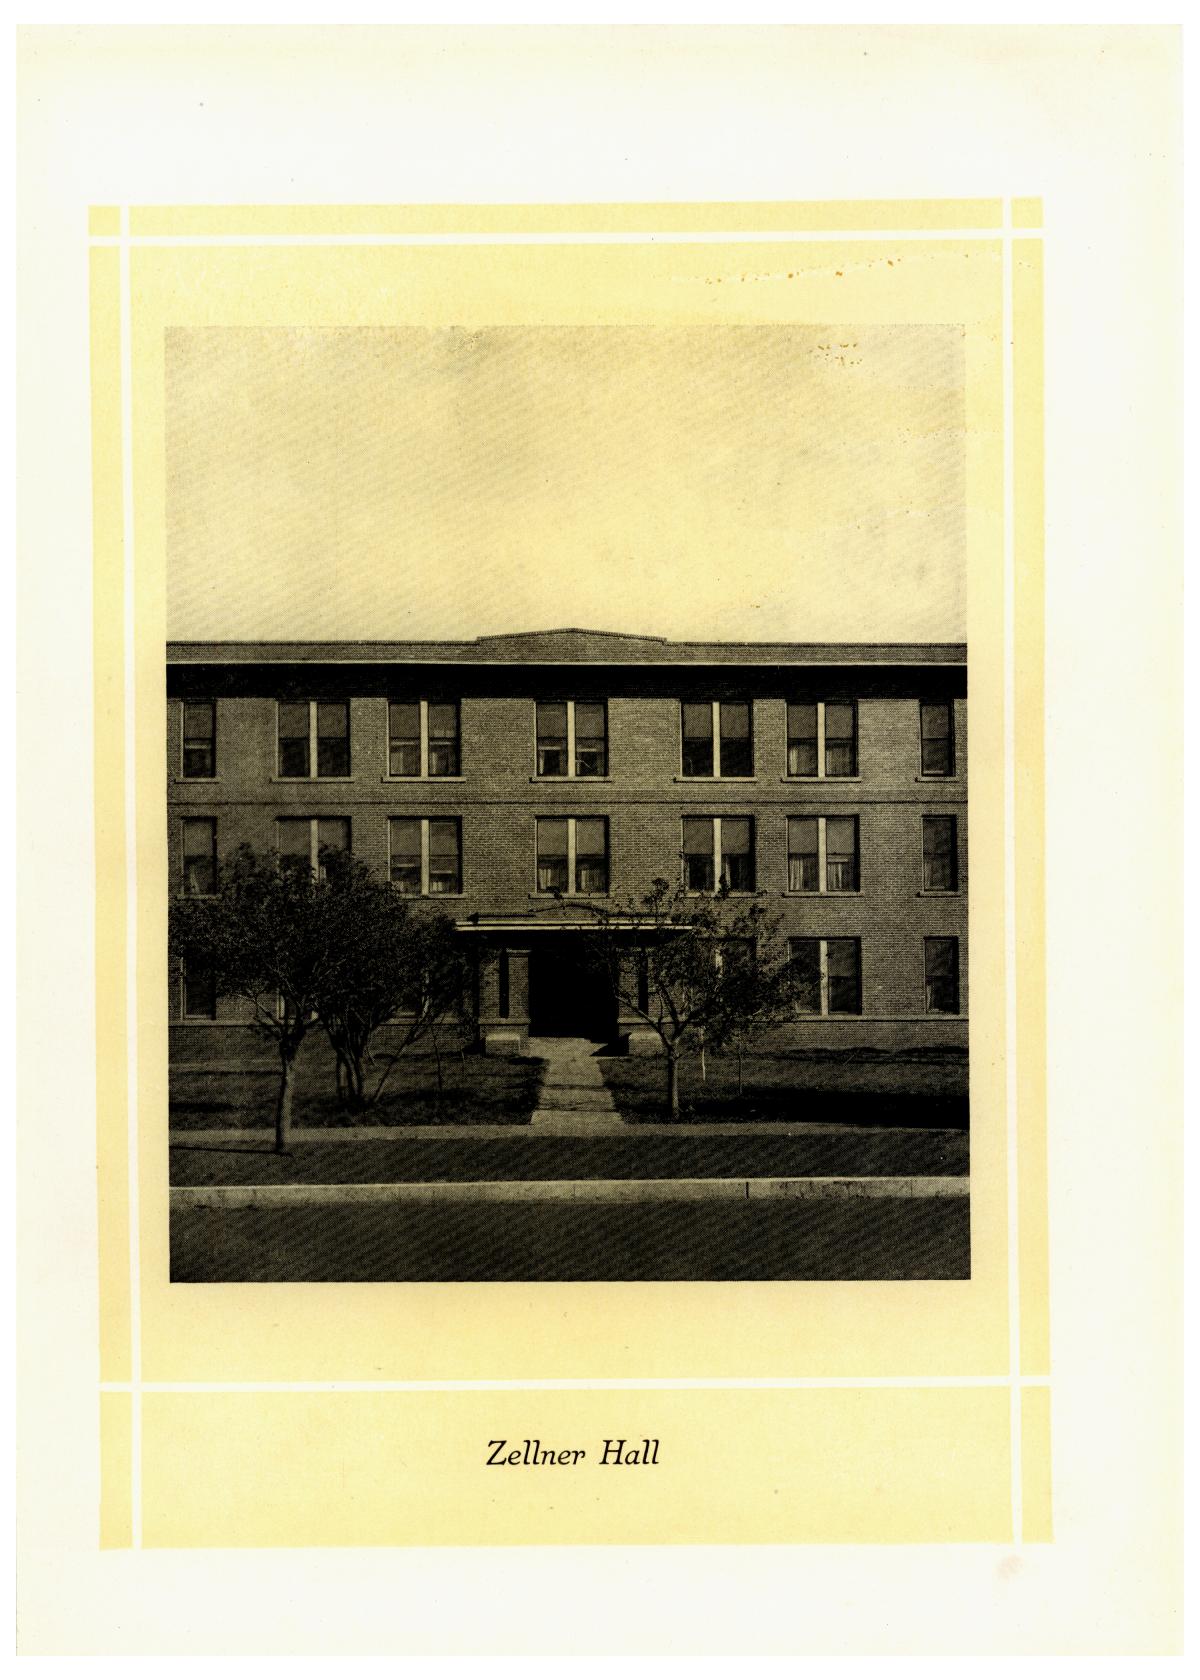 Prickly Pear, Yearbook of Abilene Christian College, 1923
                                                
                                                    13
                                                